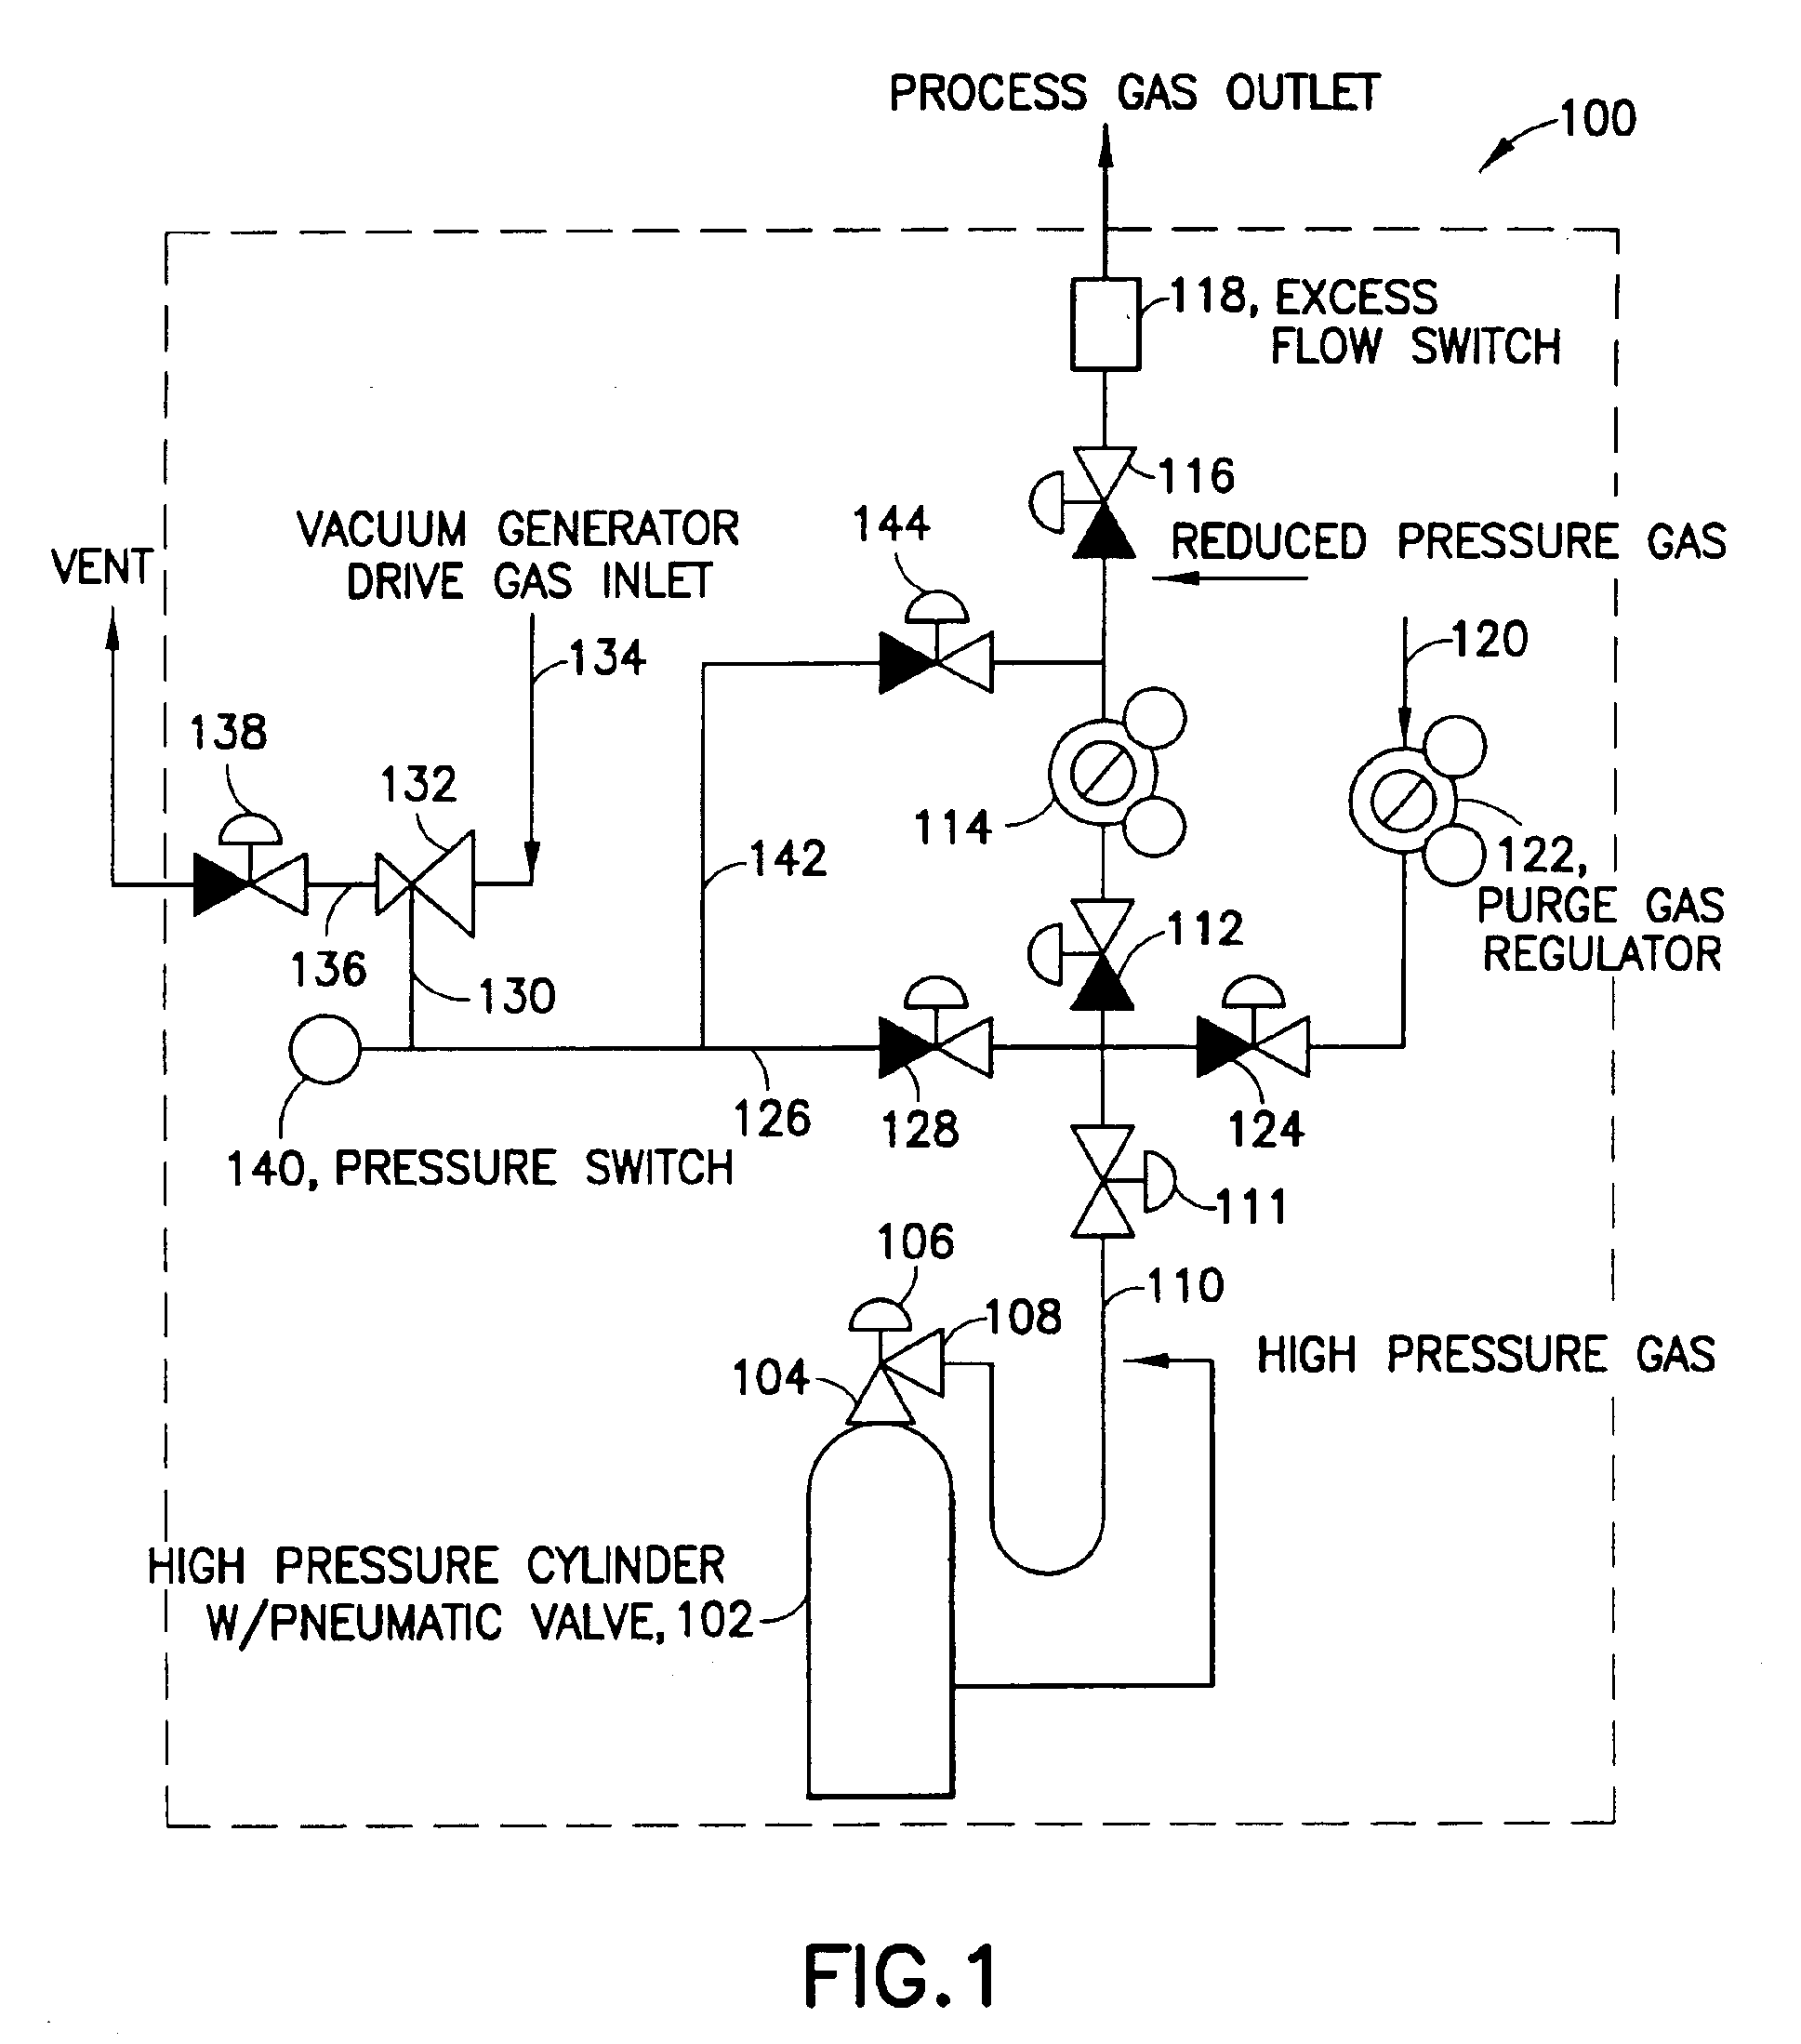 Pressure-based gas delivery system and method for reducing risks associated with storage and delivery of high pressure gases